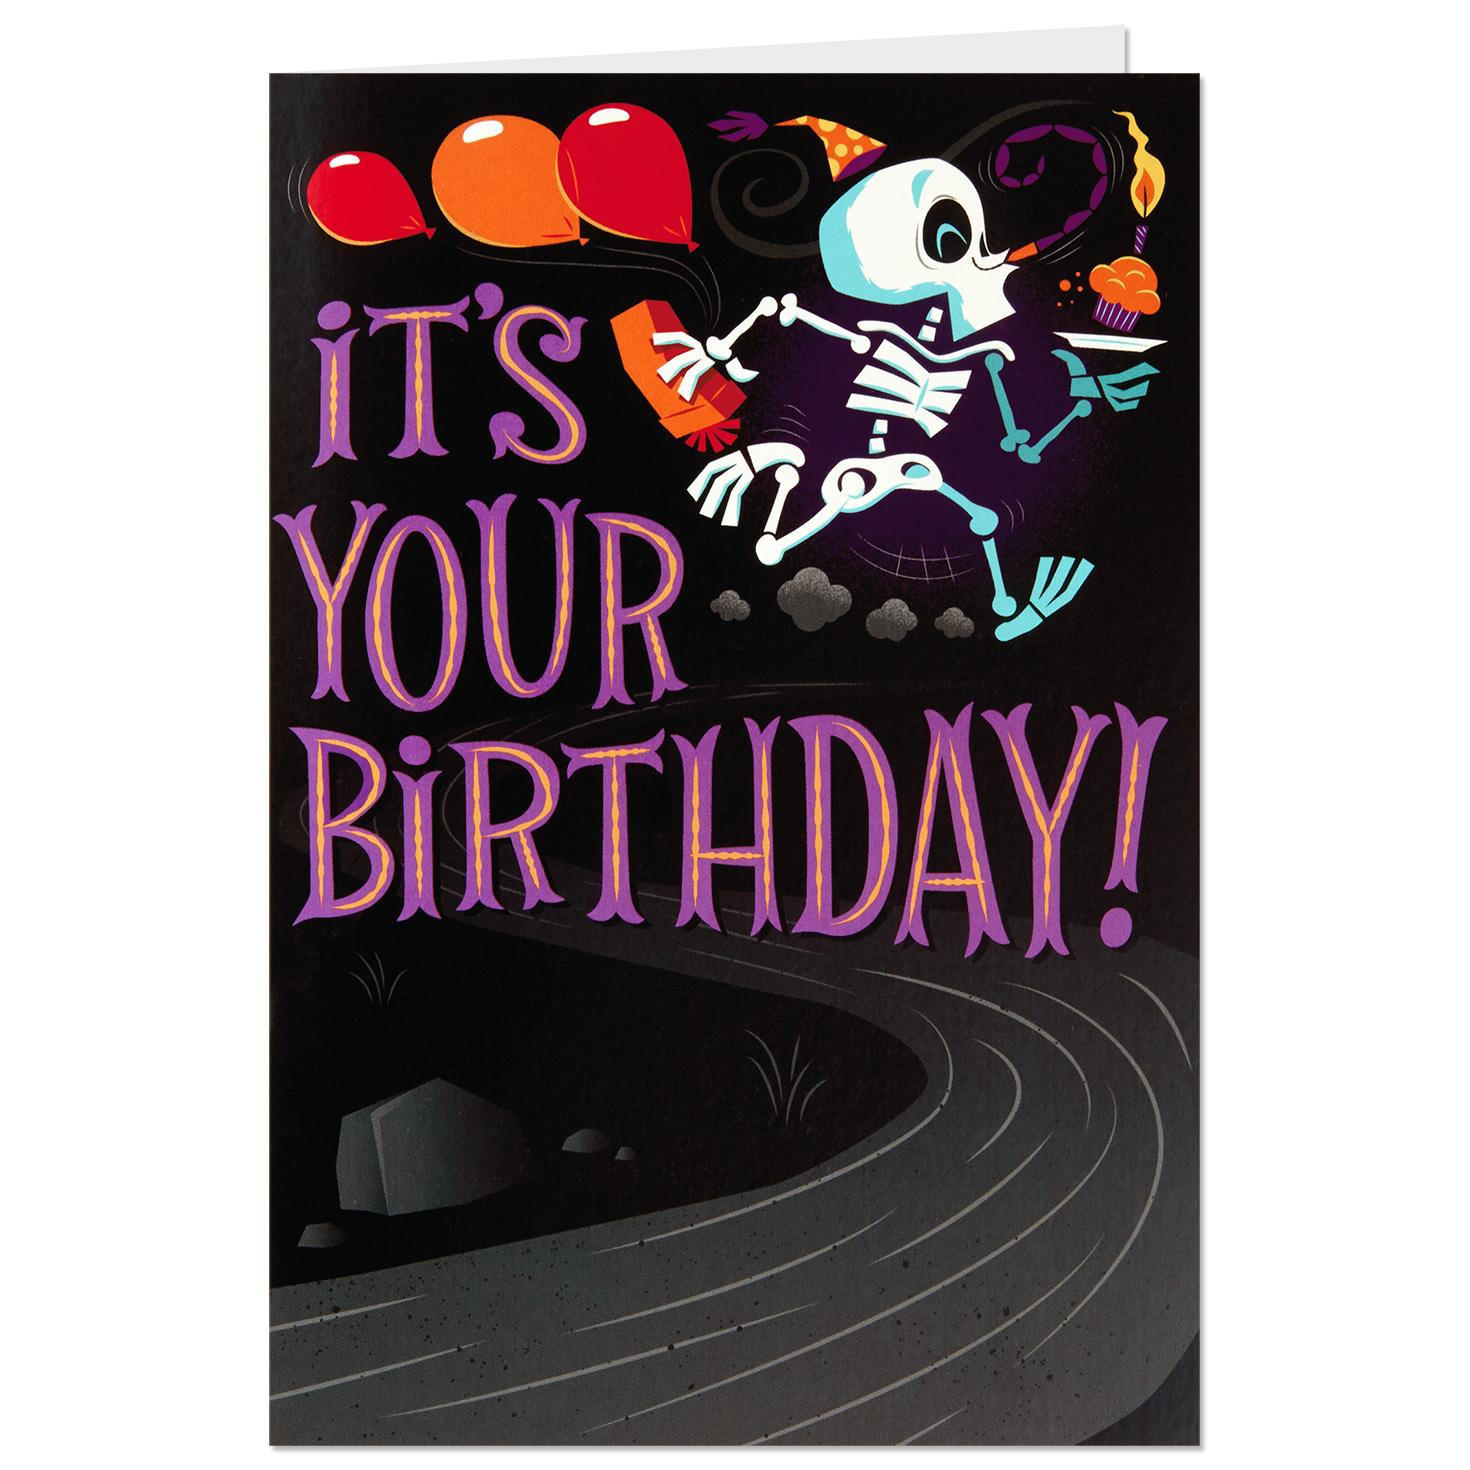 Halloween Birthday Wishes
 Party Skeletons Pop Up Halloween Birthday Card Greeting